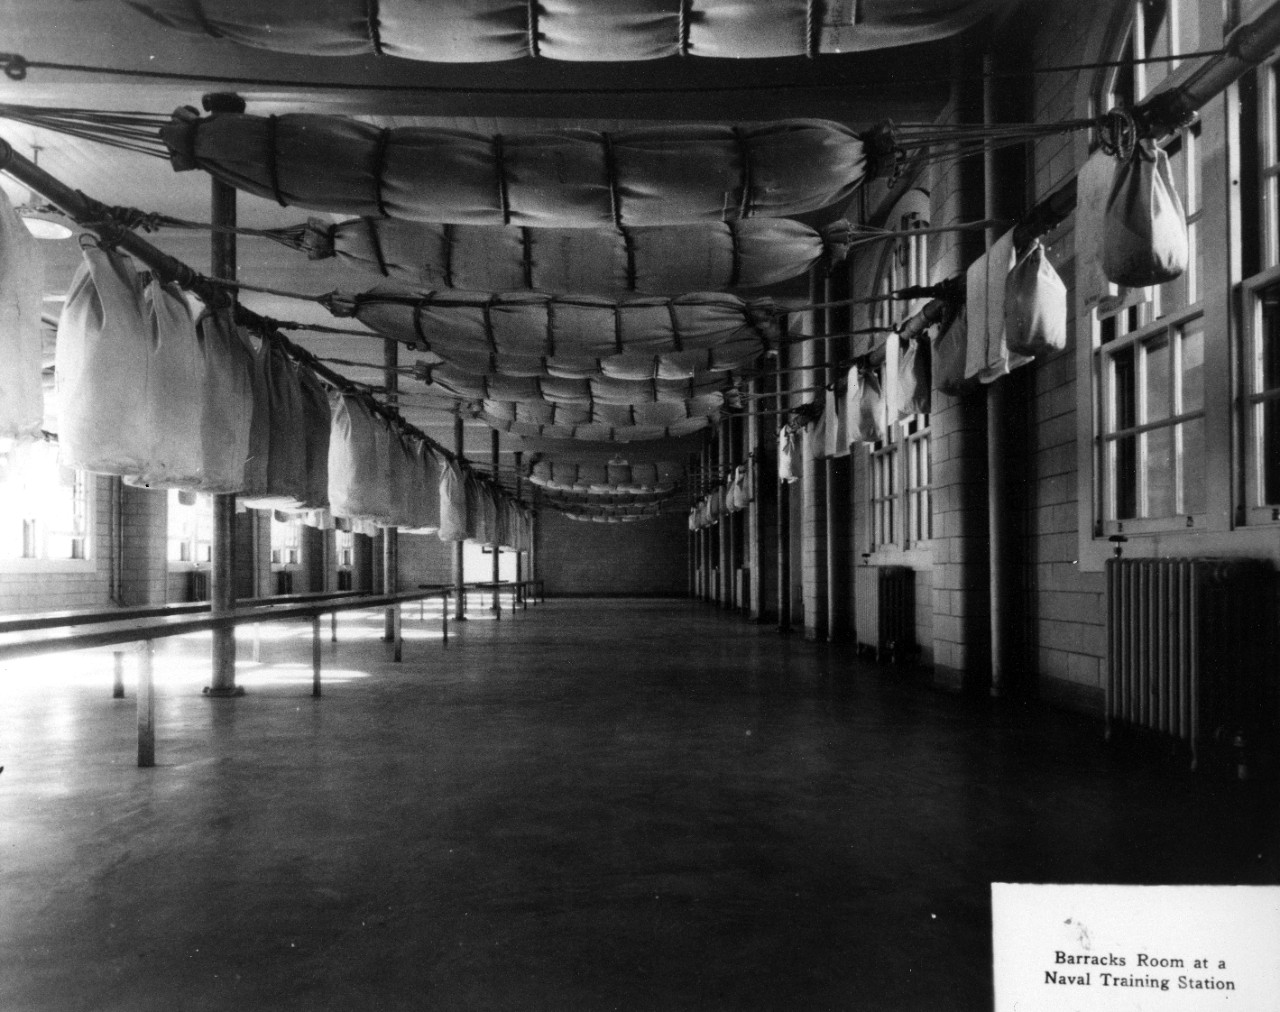 Barracks Room at a Naval Training Station, possibly San Diego.